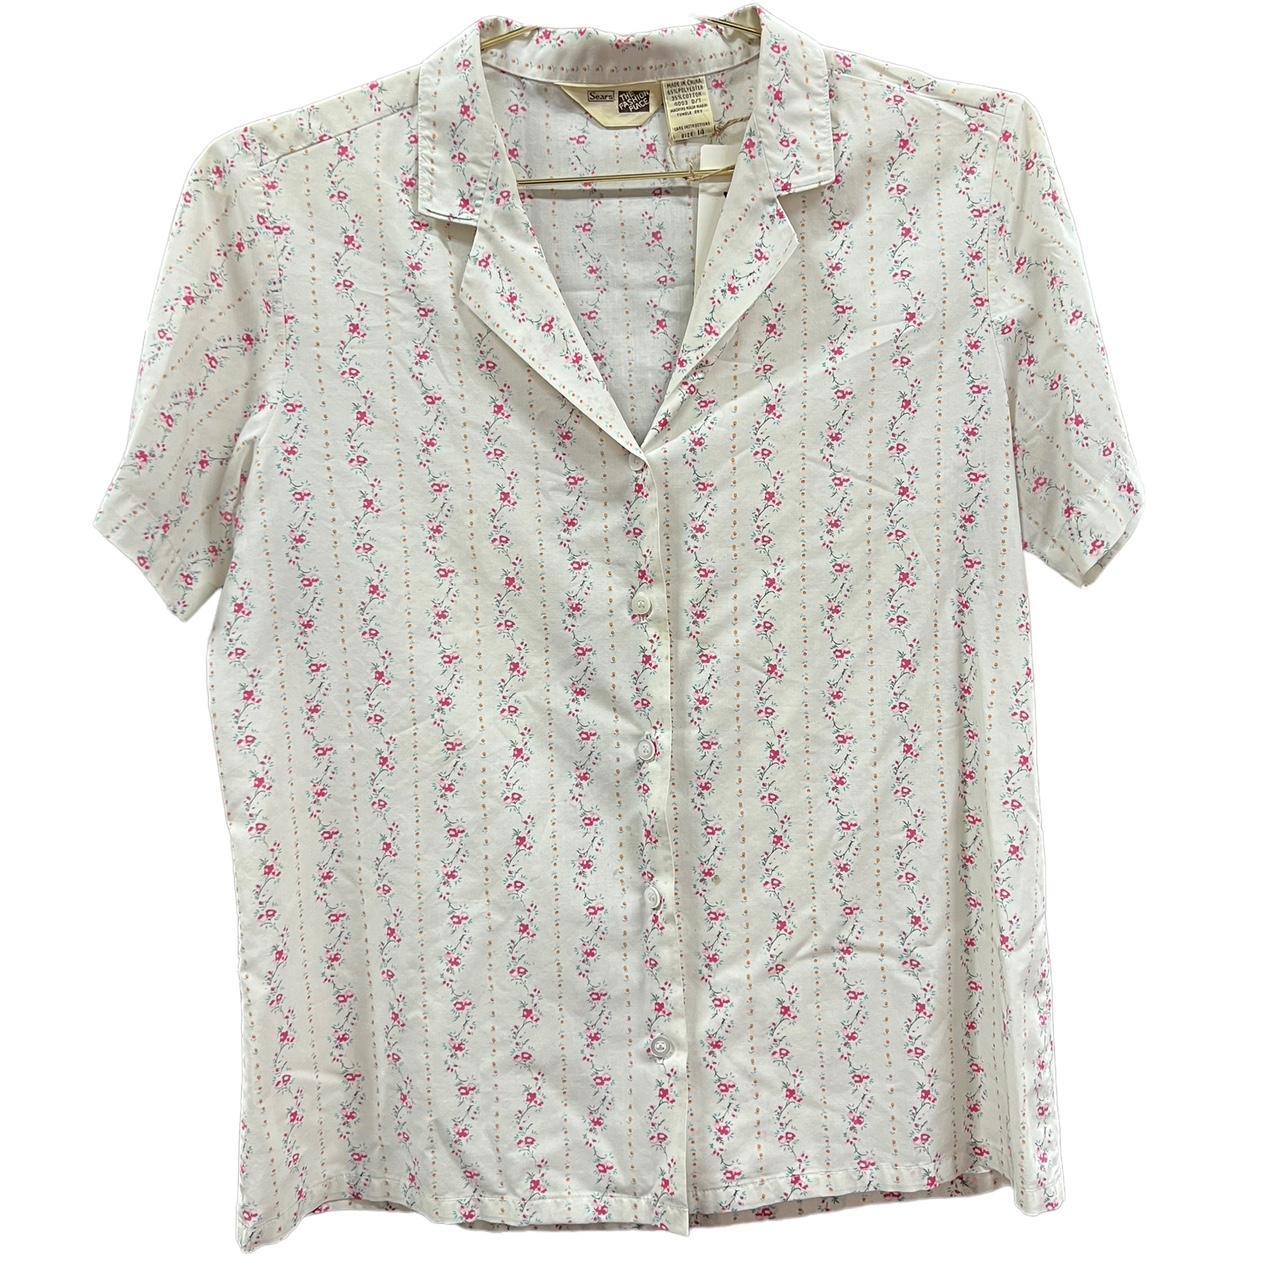 Sears Women's White and Pink Blouse